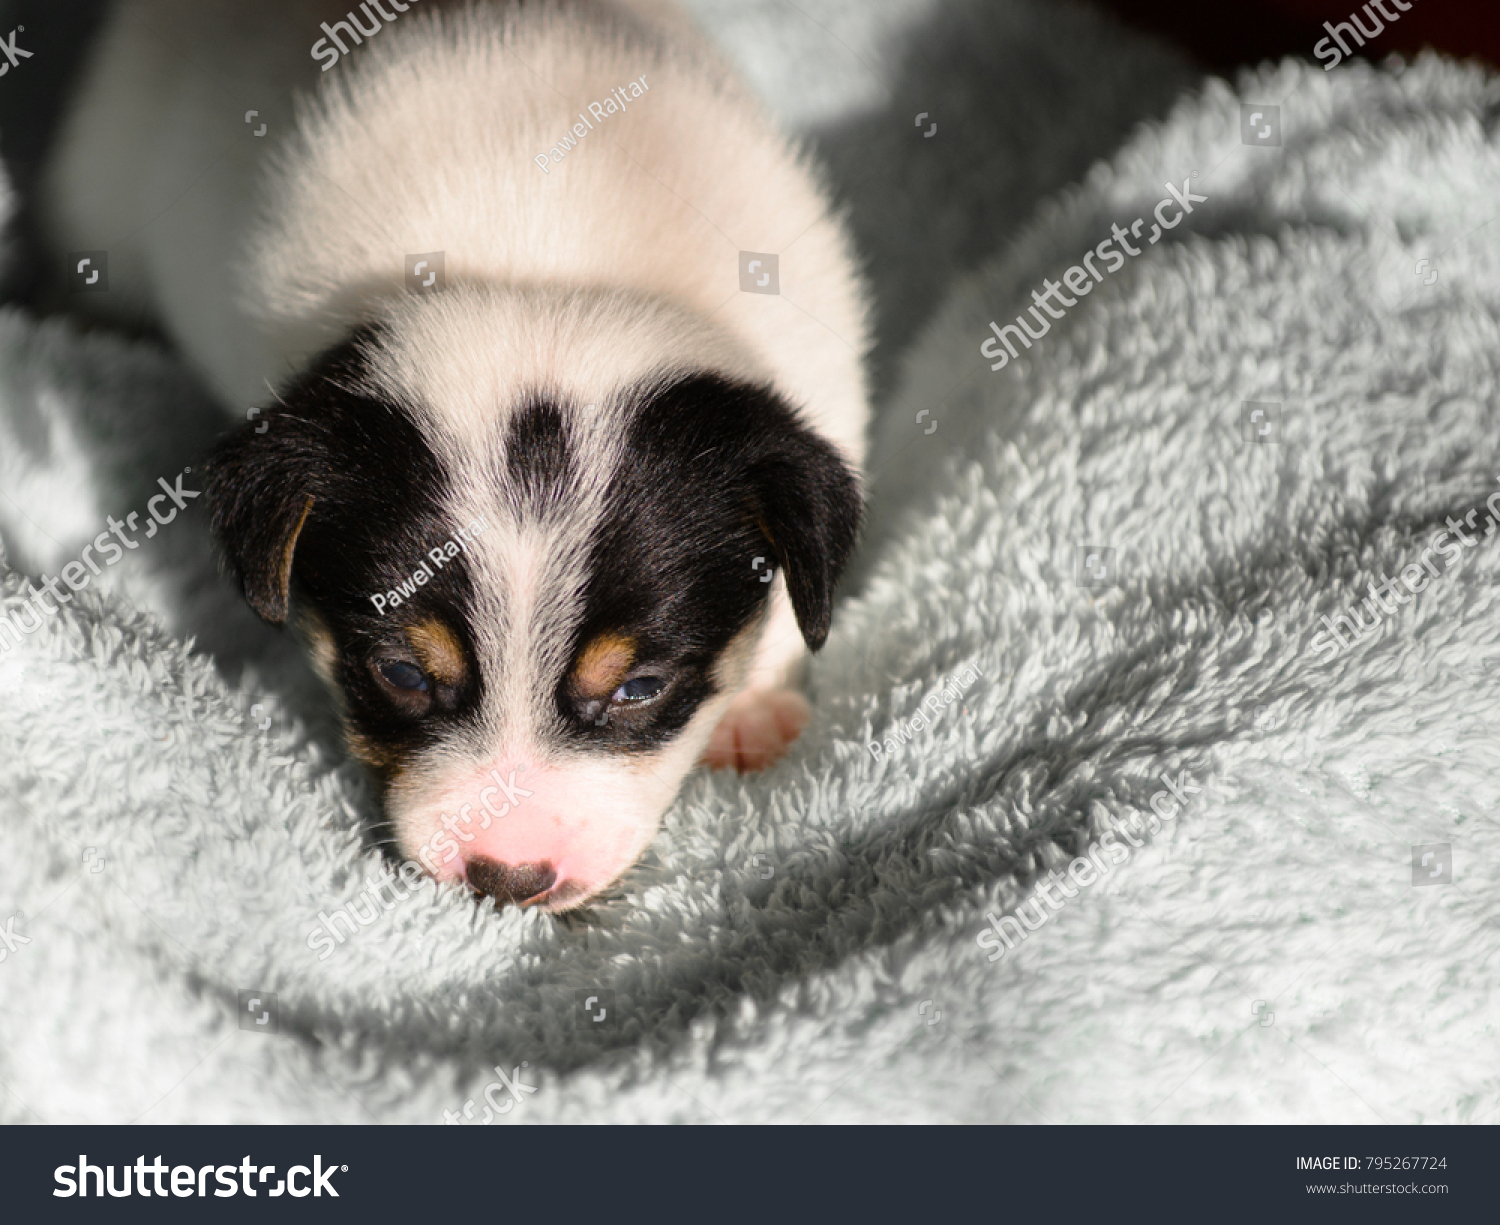 Small Puppy Jack Russell Terrier Opened Animals Wildlife Stock Image 795267724,Sausage Gravy Stuffed Biscuits